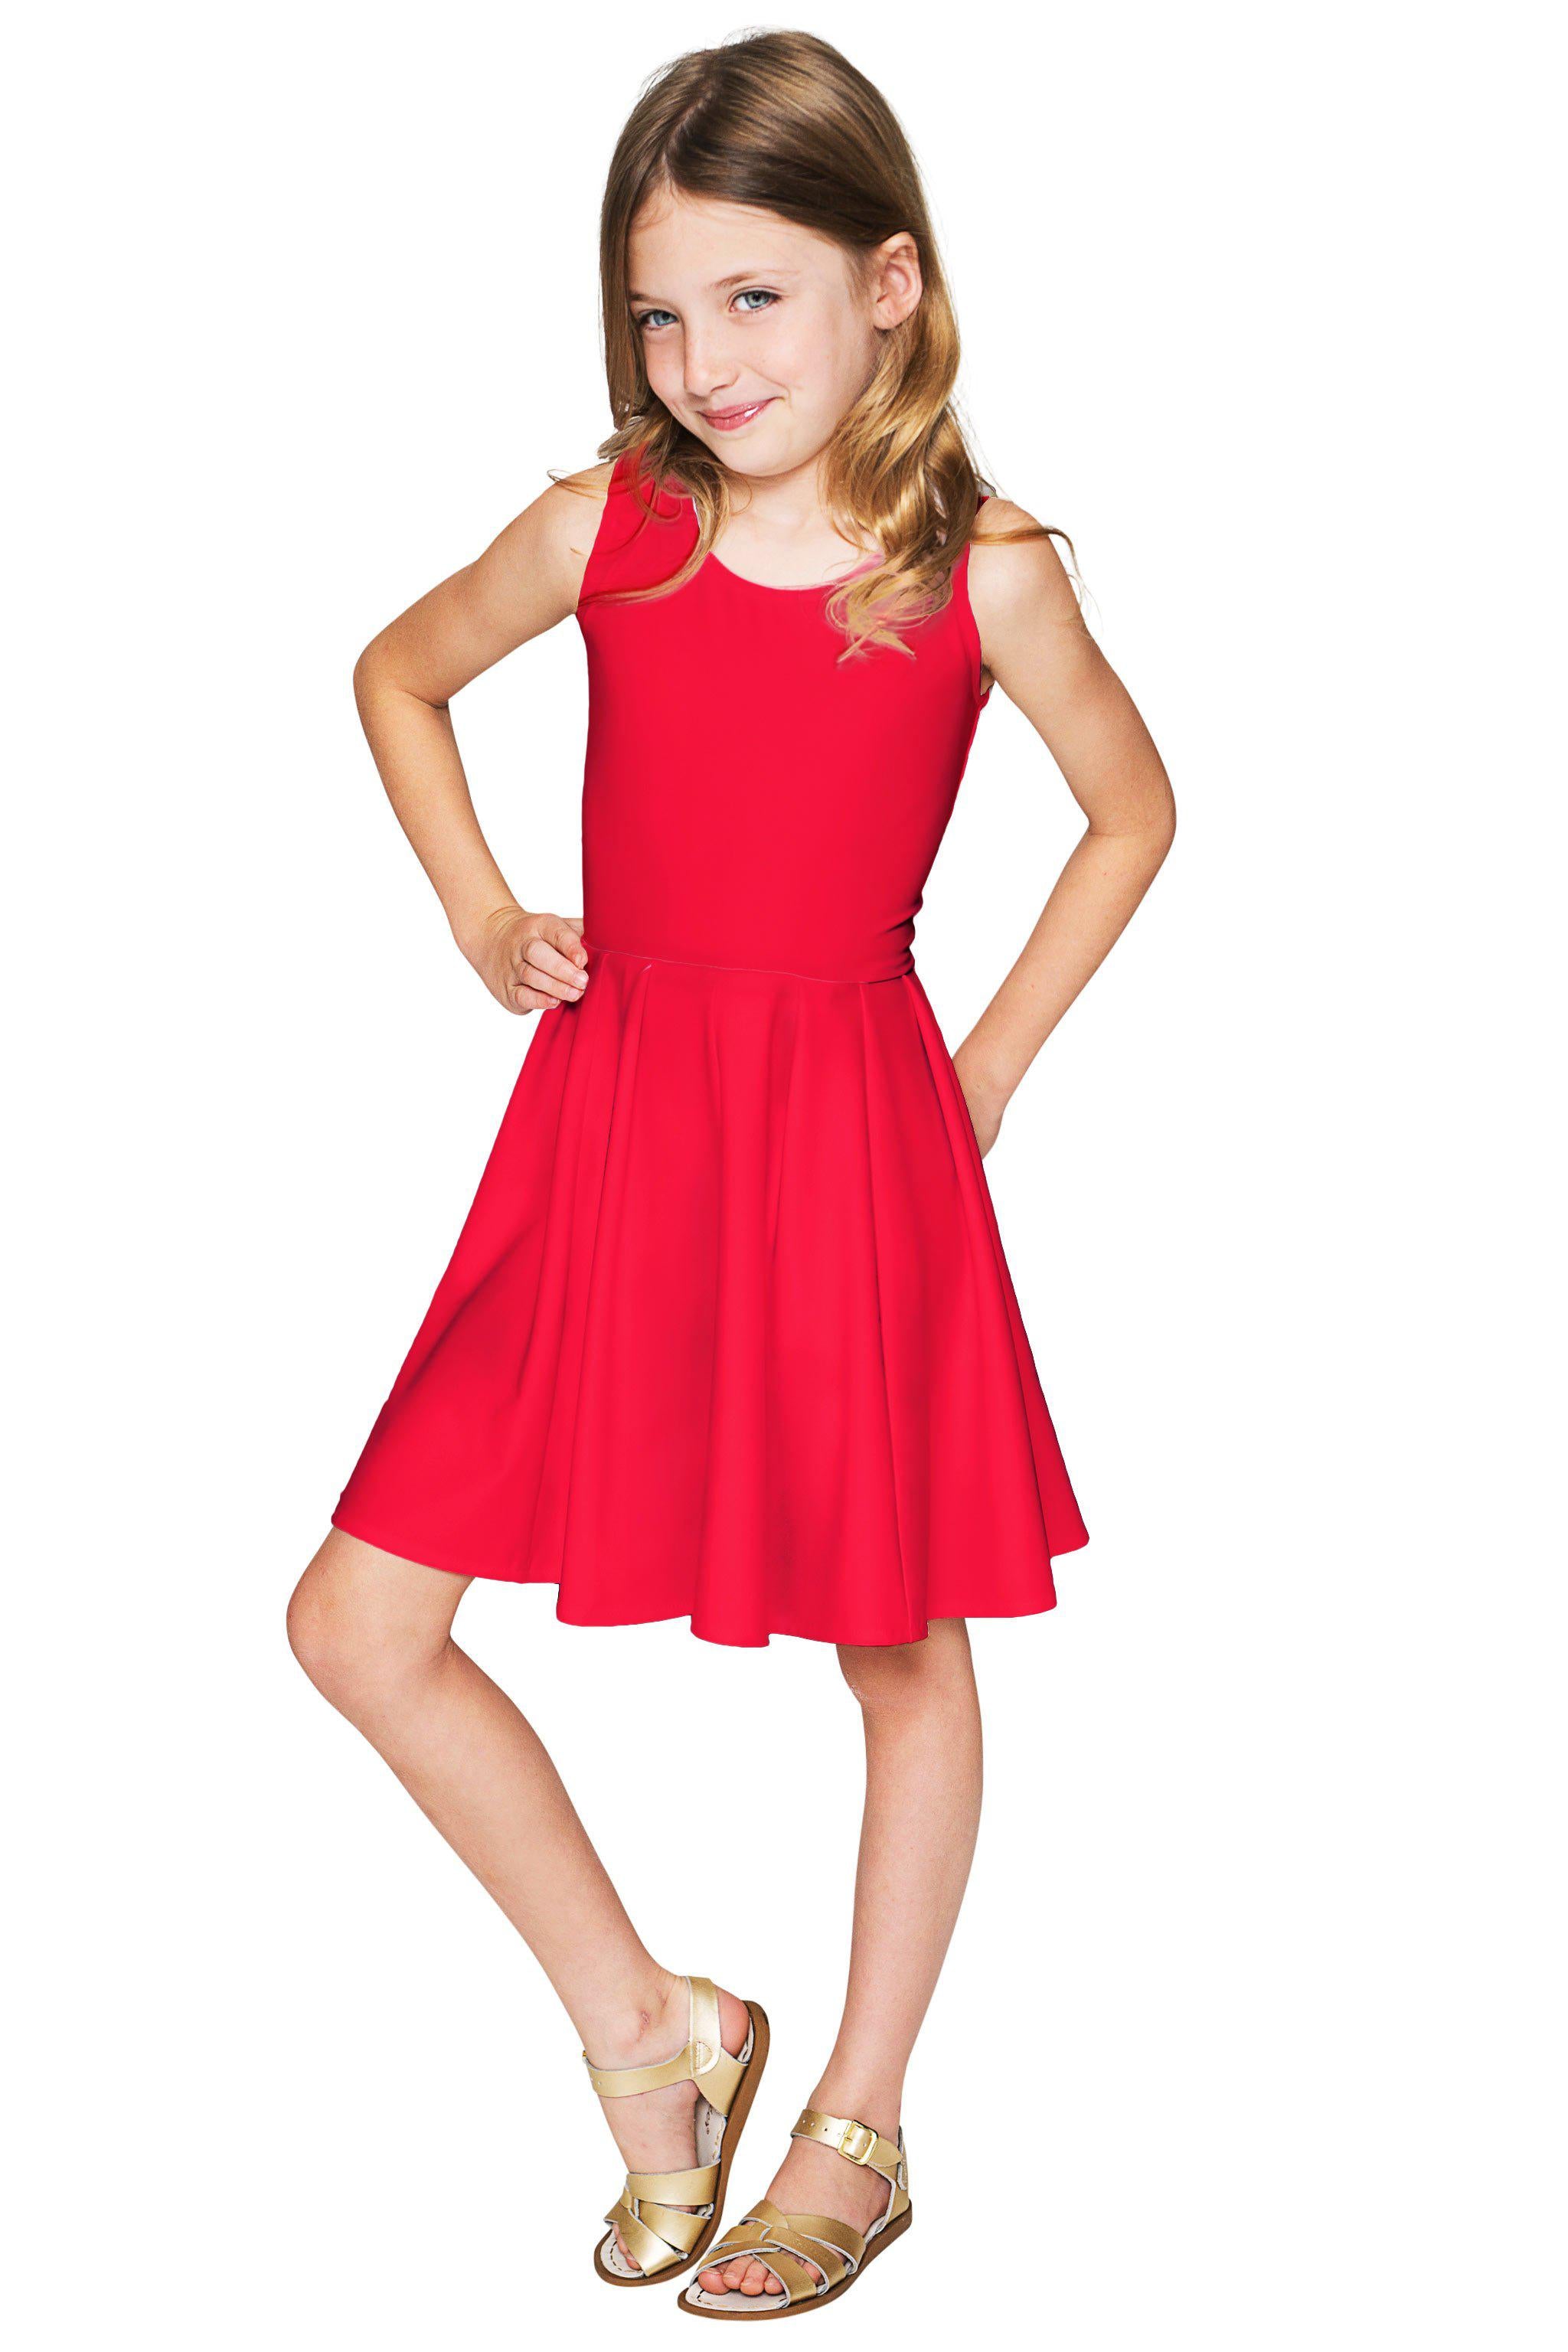 Cherry Red Fancy Fit & Flare Chic Christmas Party Dress - Girls - Pineapple Clothing